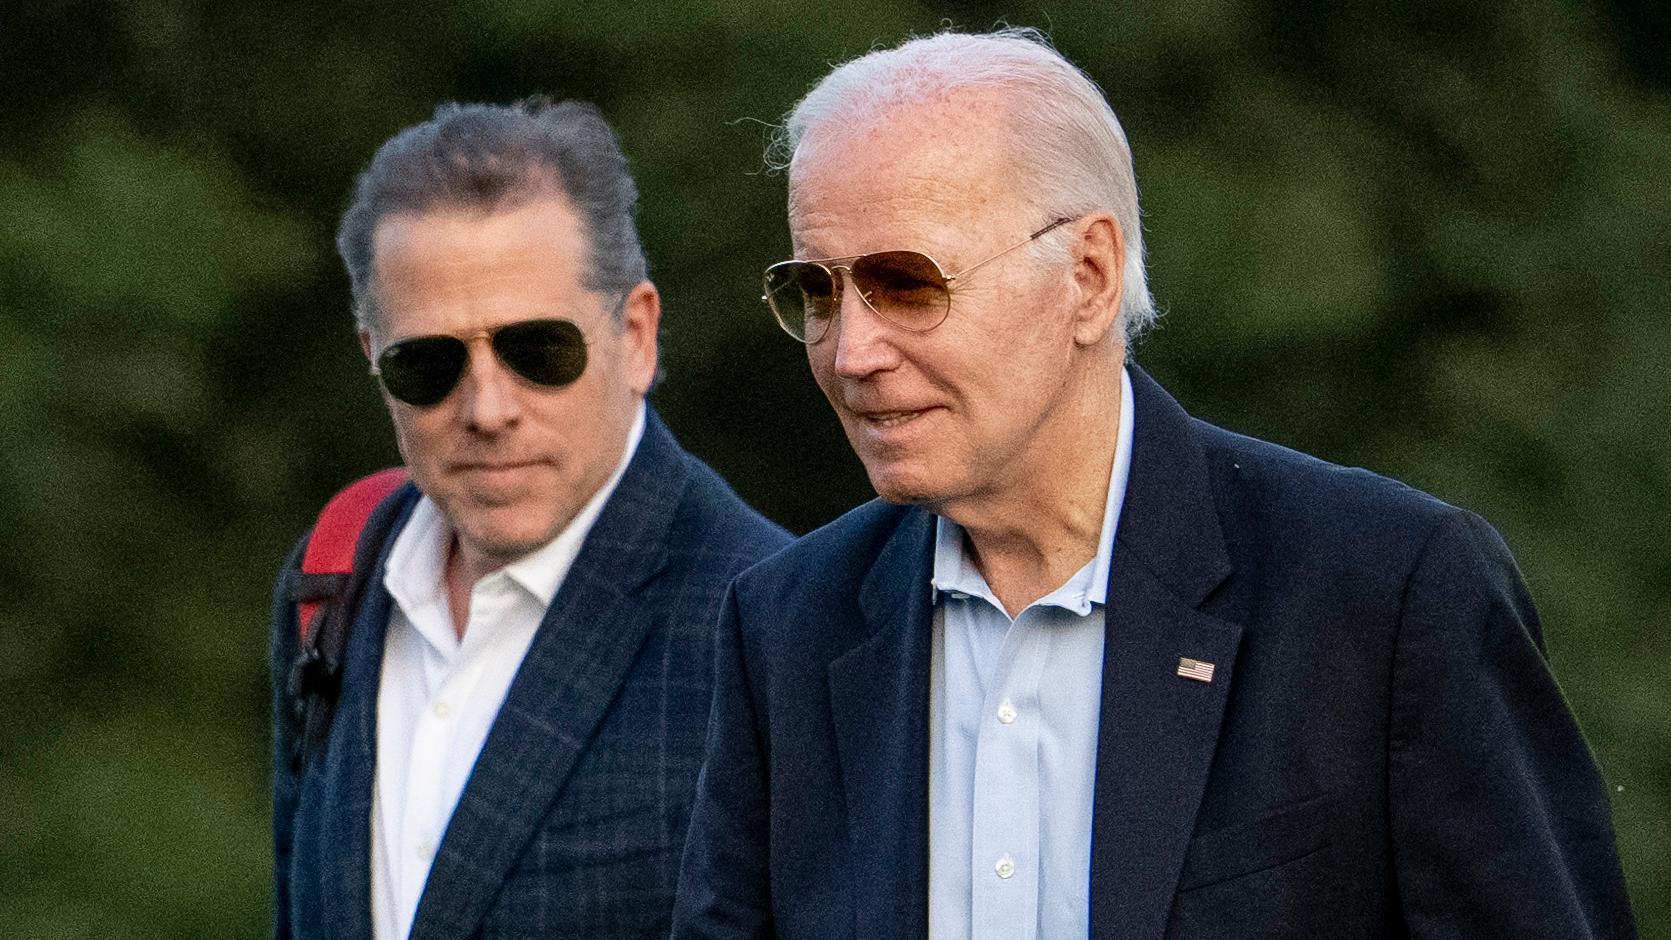 Hunter Biden: the struggles and scandals of the president’s son